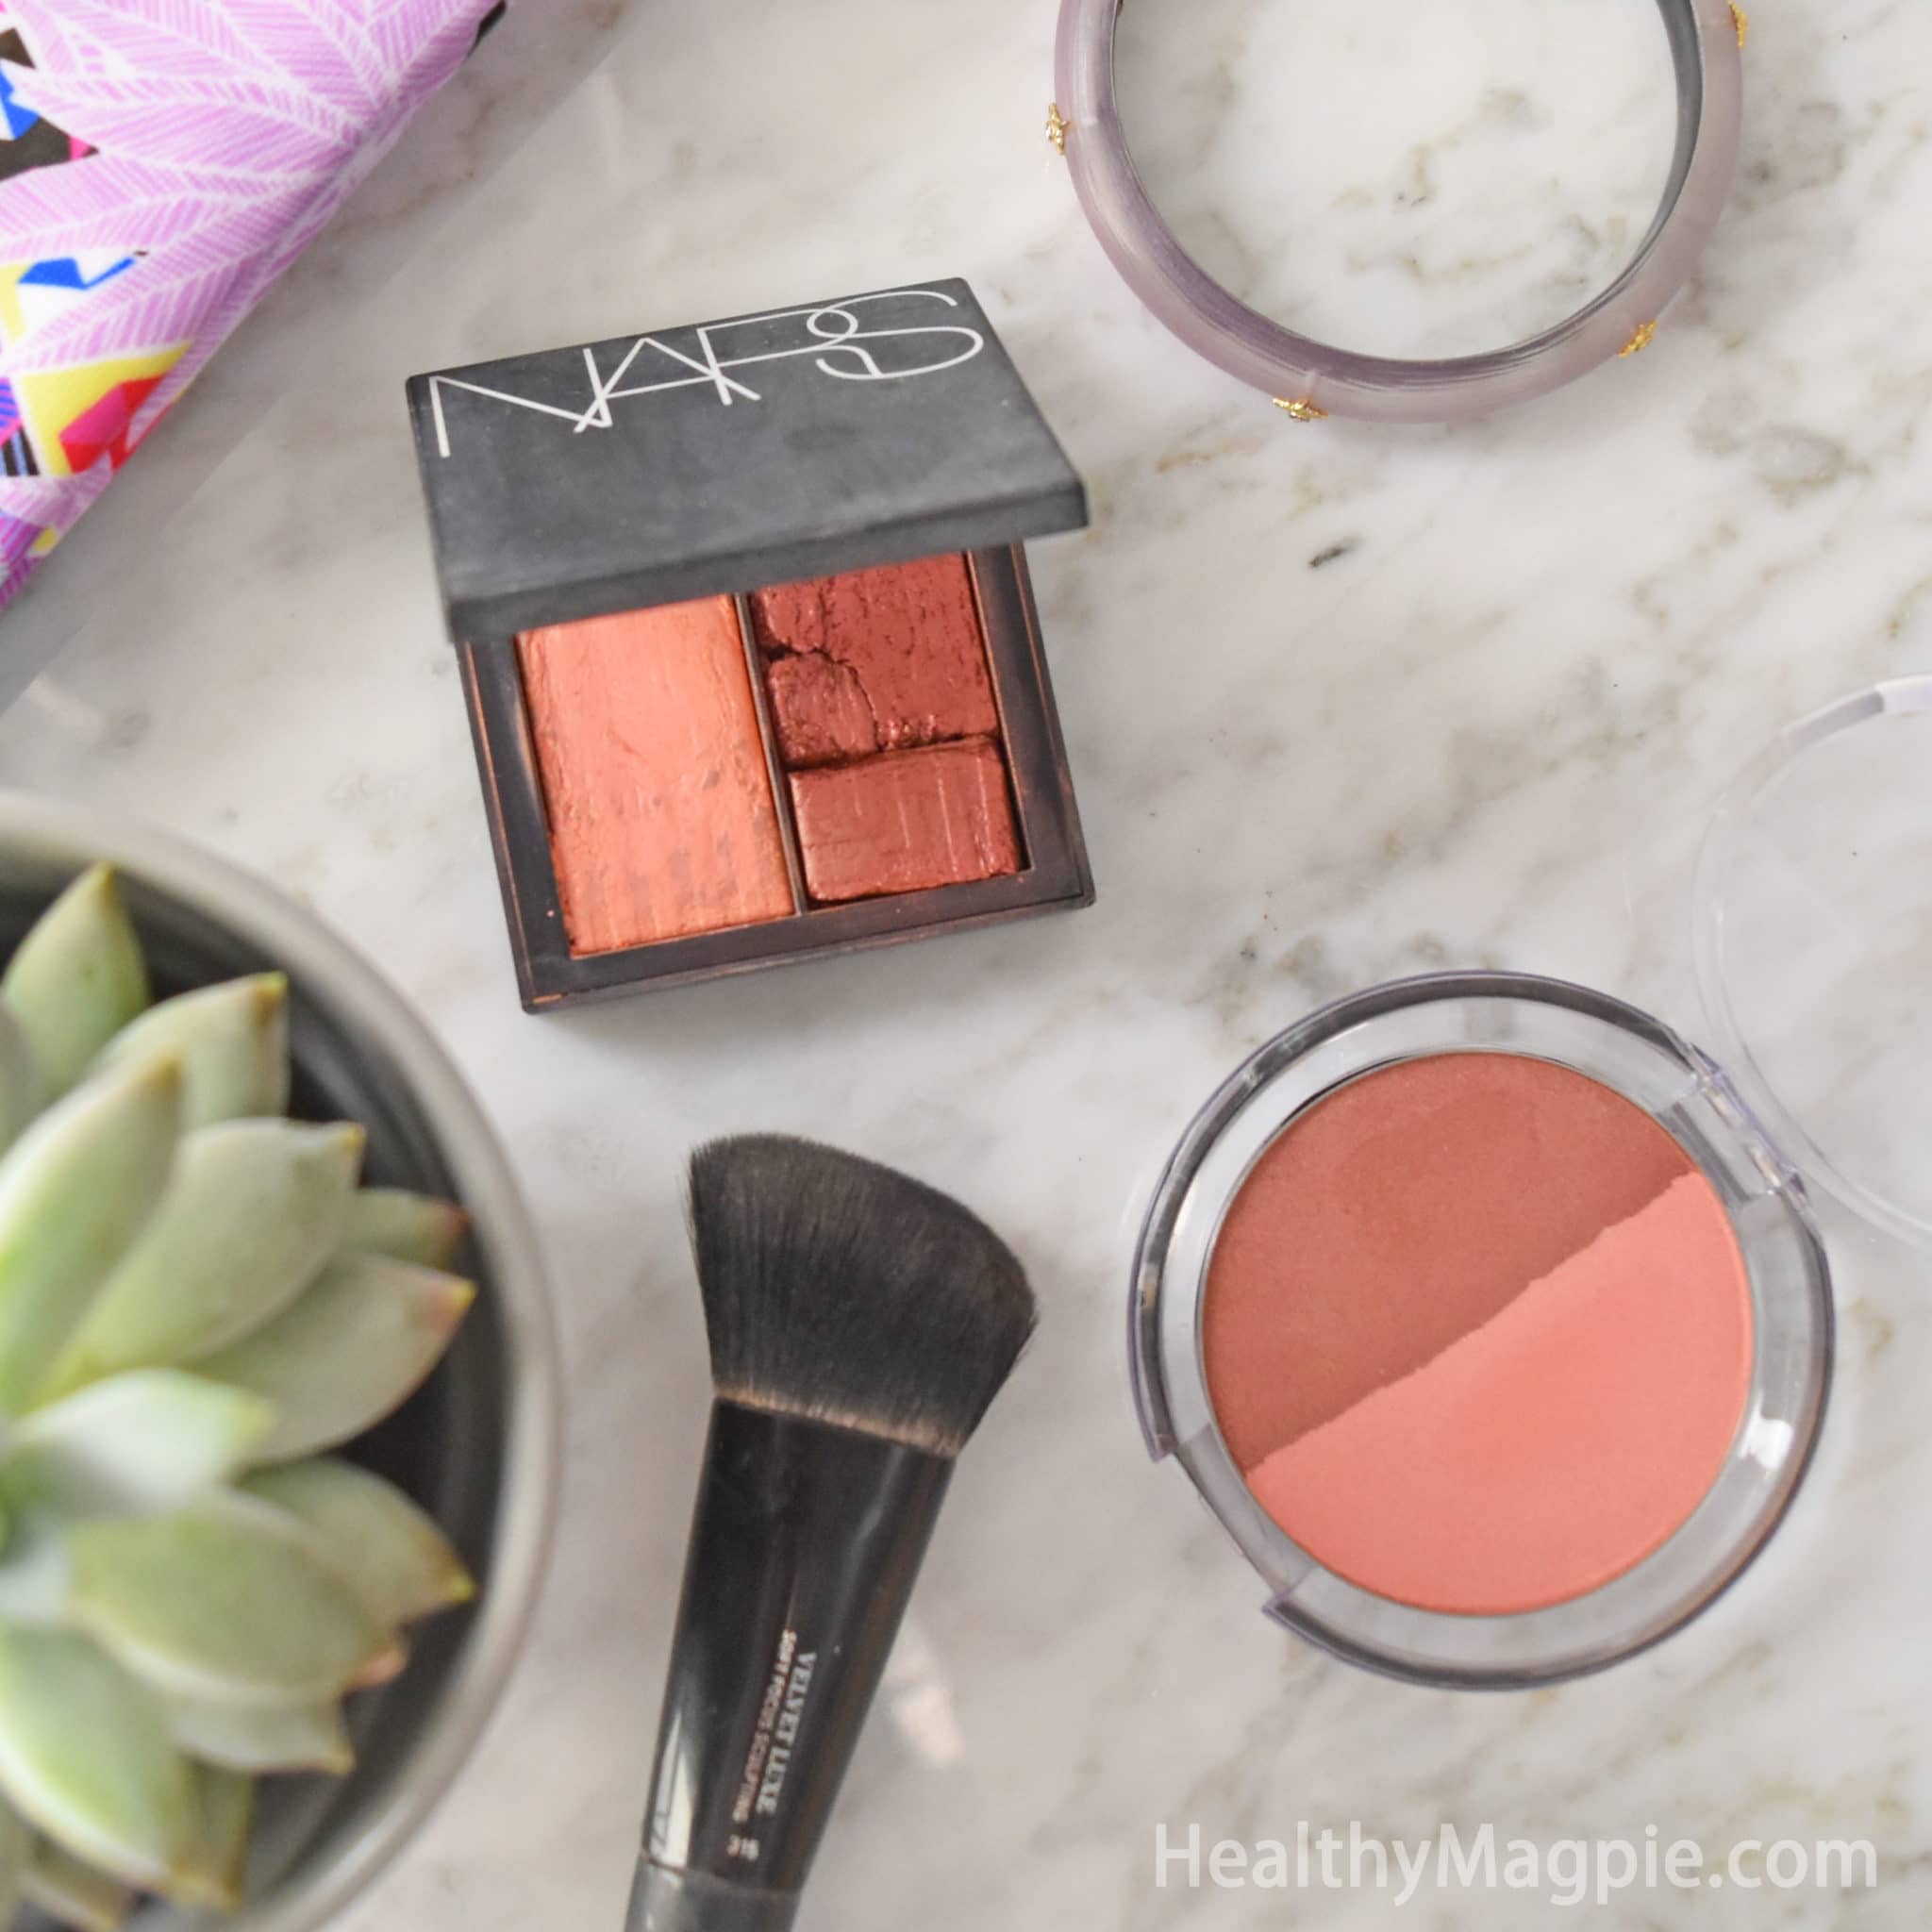 If you weren't able to get the discontinued “thrill” blush by nars